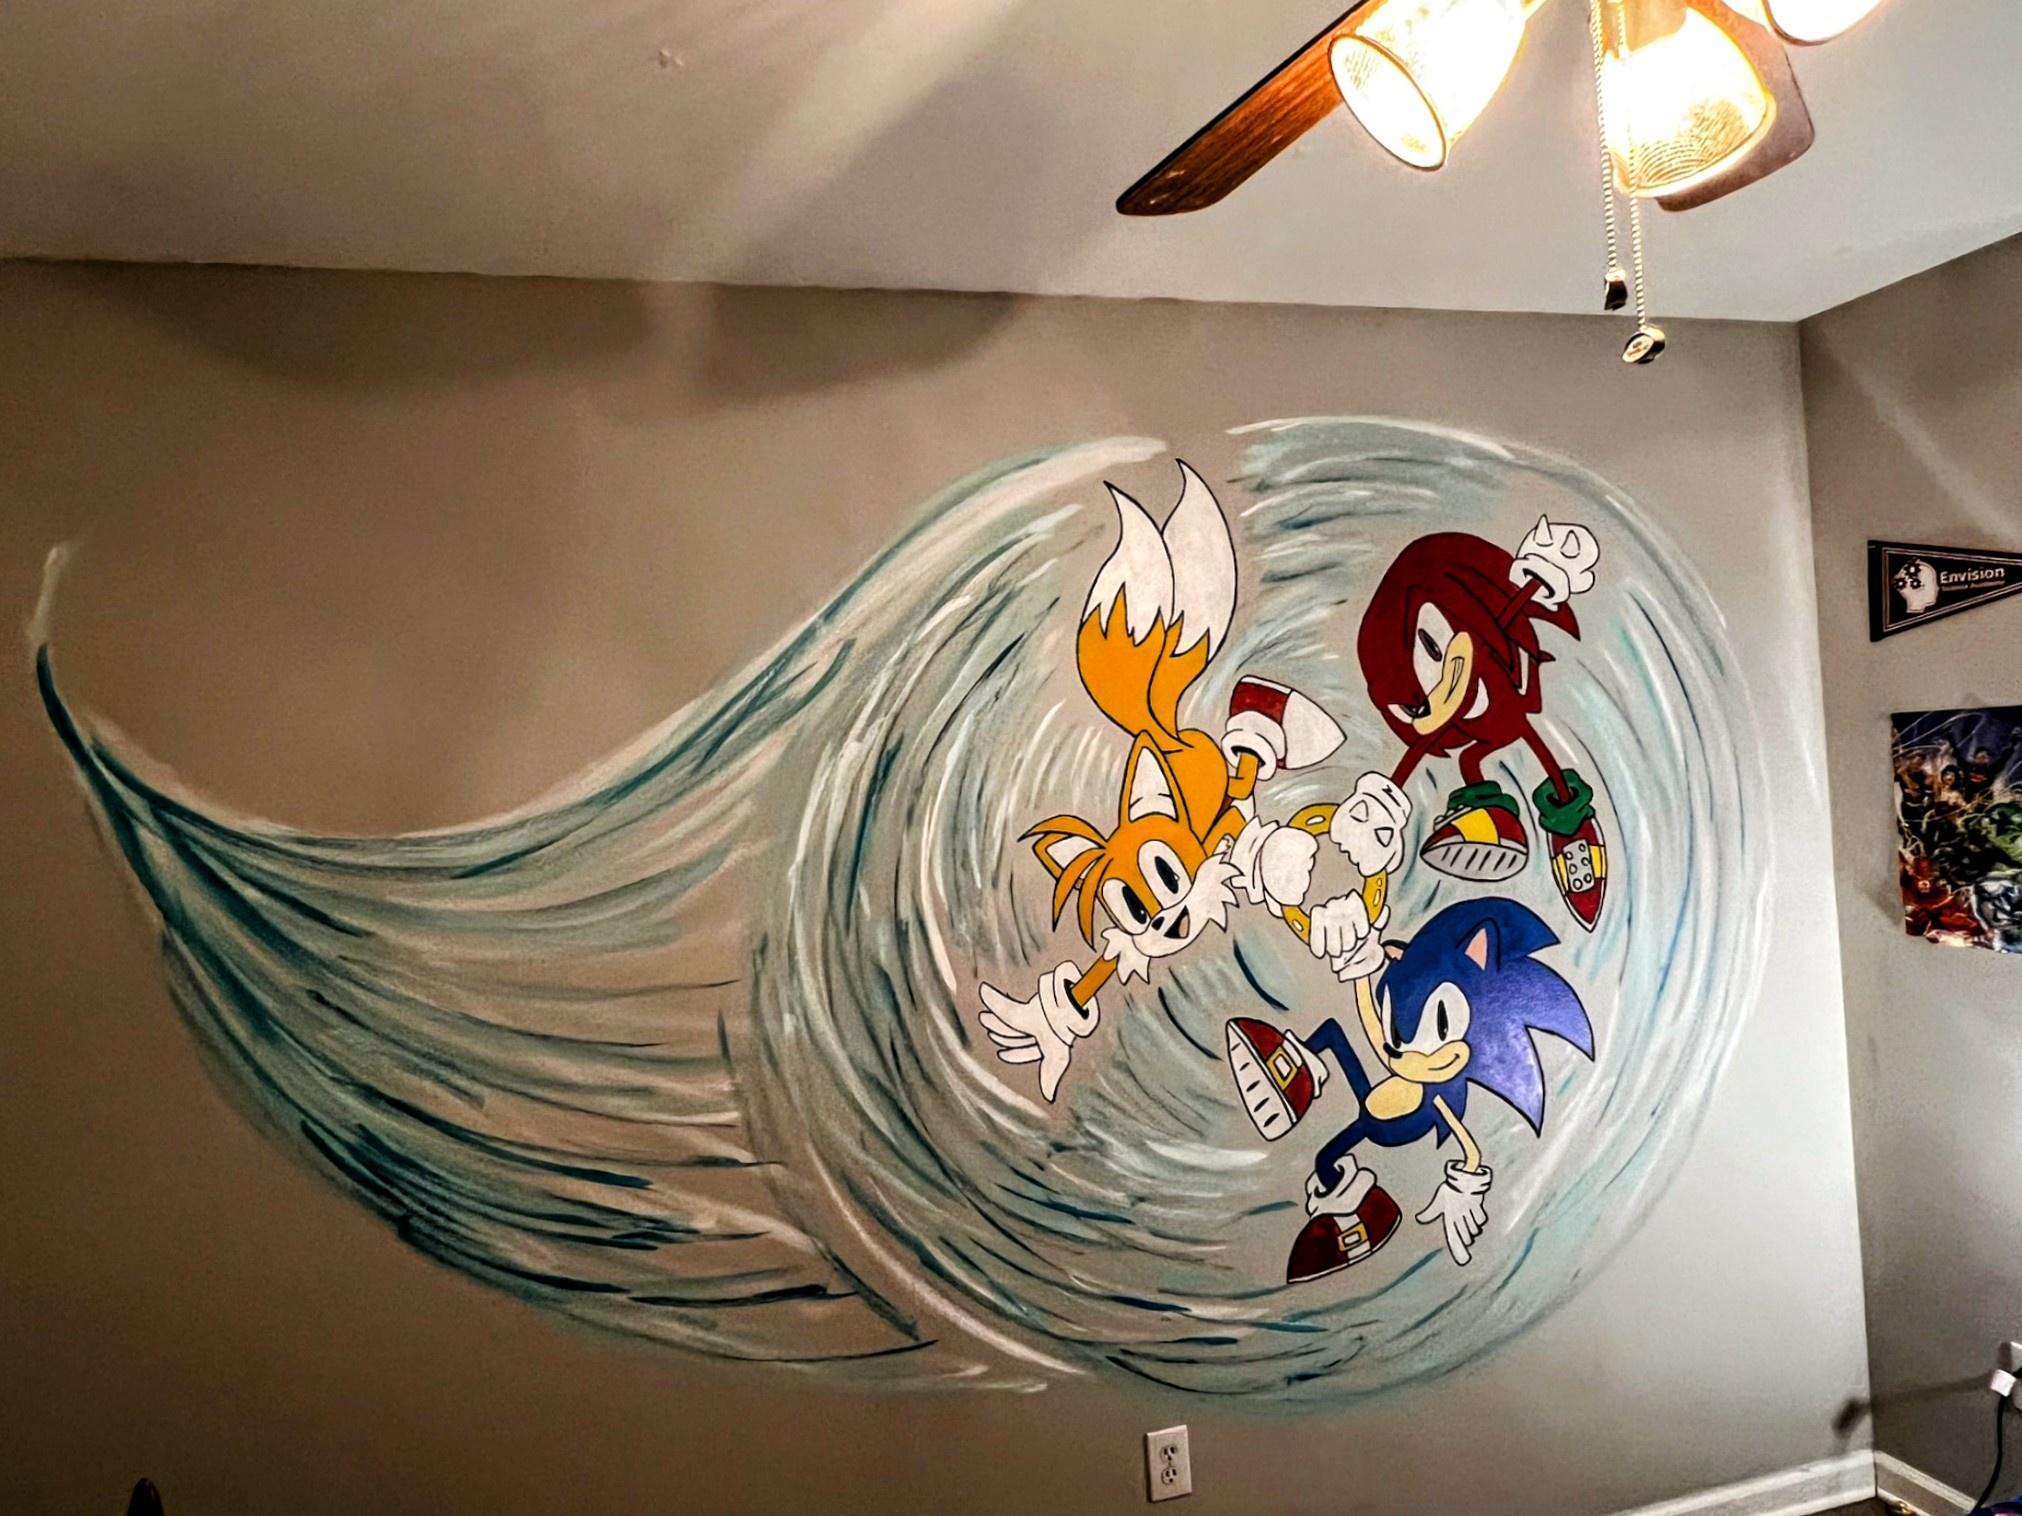 Sharing the mural I painted on my youth’ wall for art high-tail